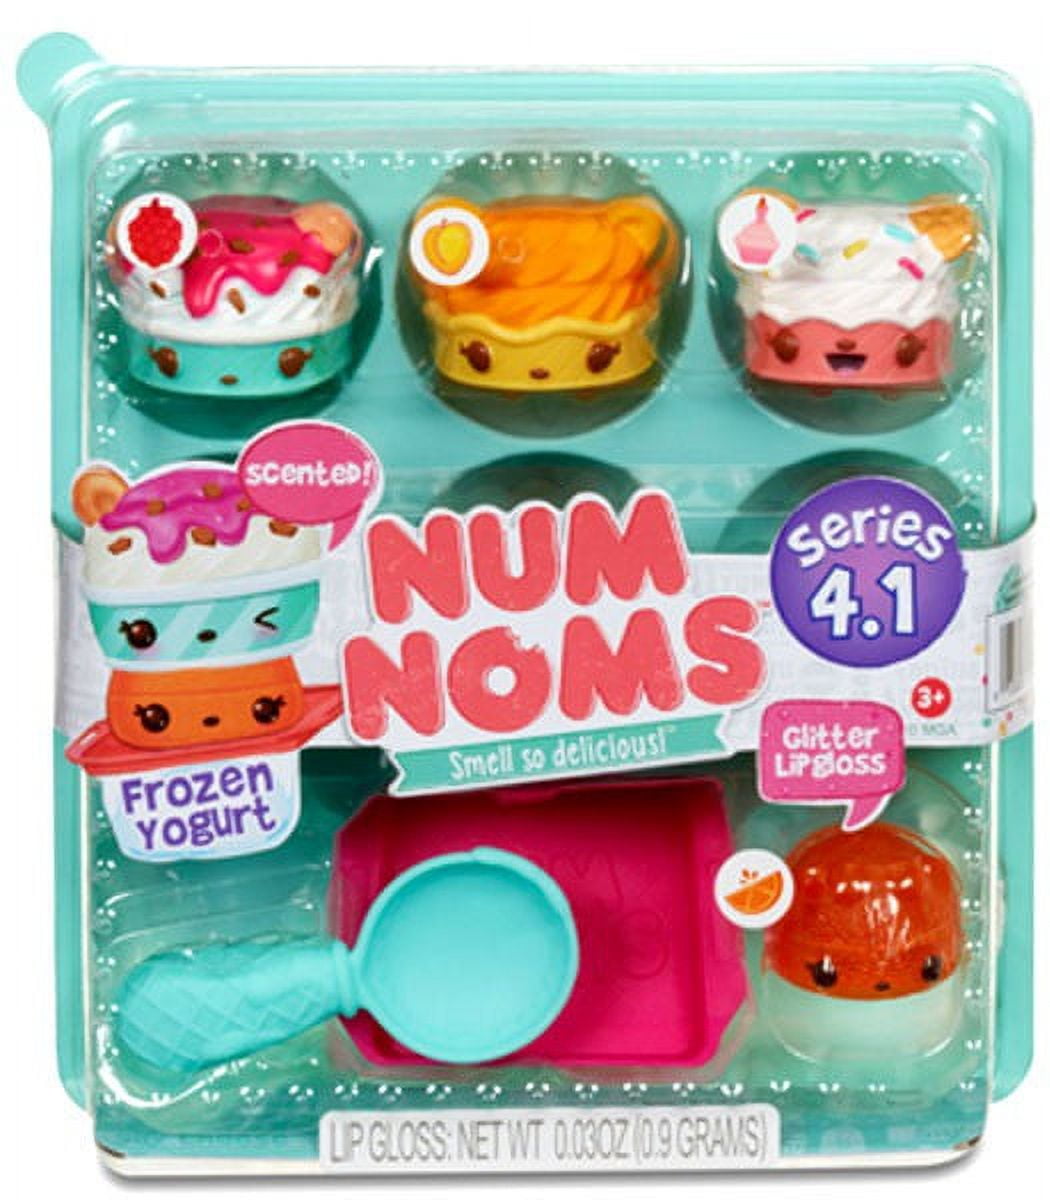 Starter Pack, Num Noms Wikia